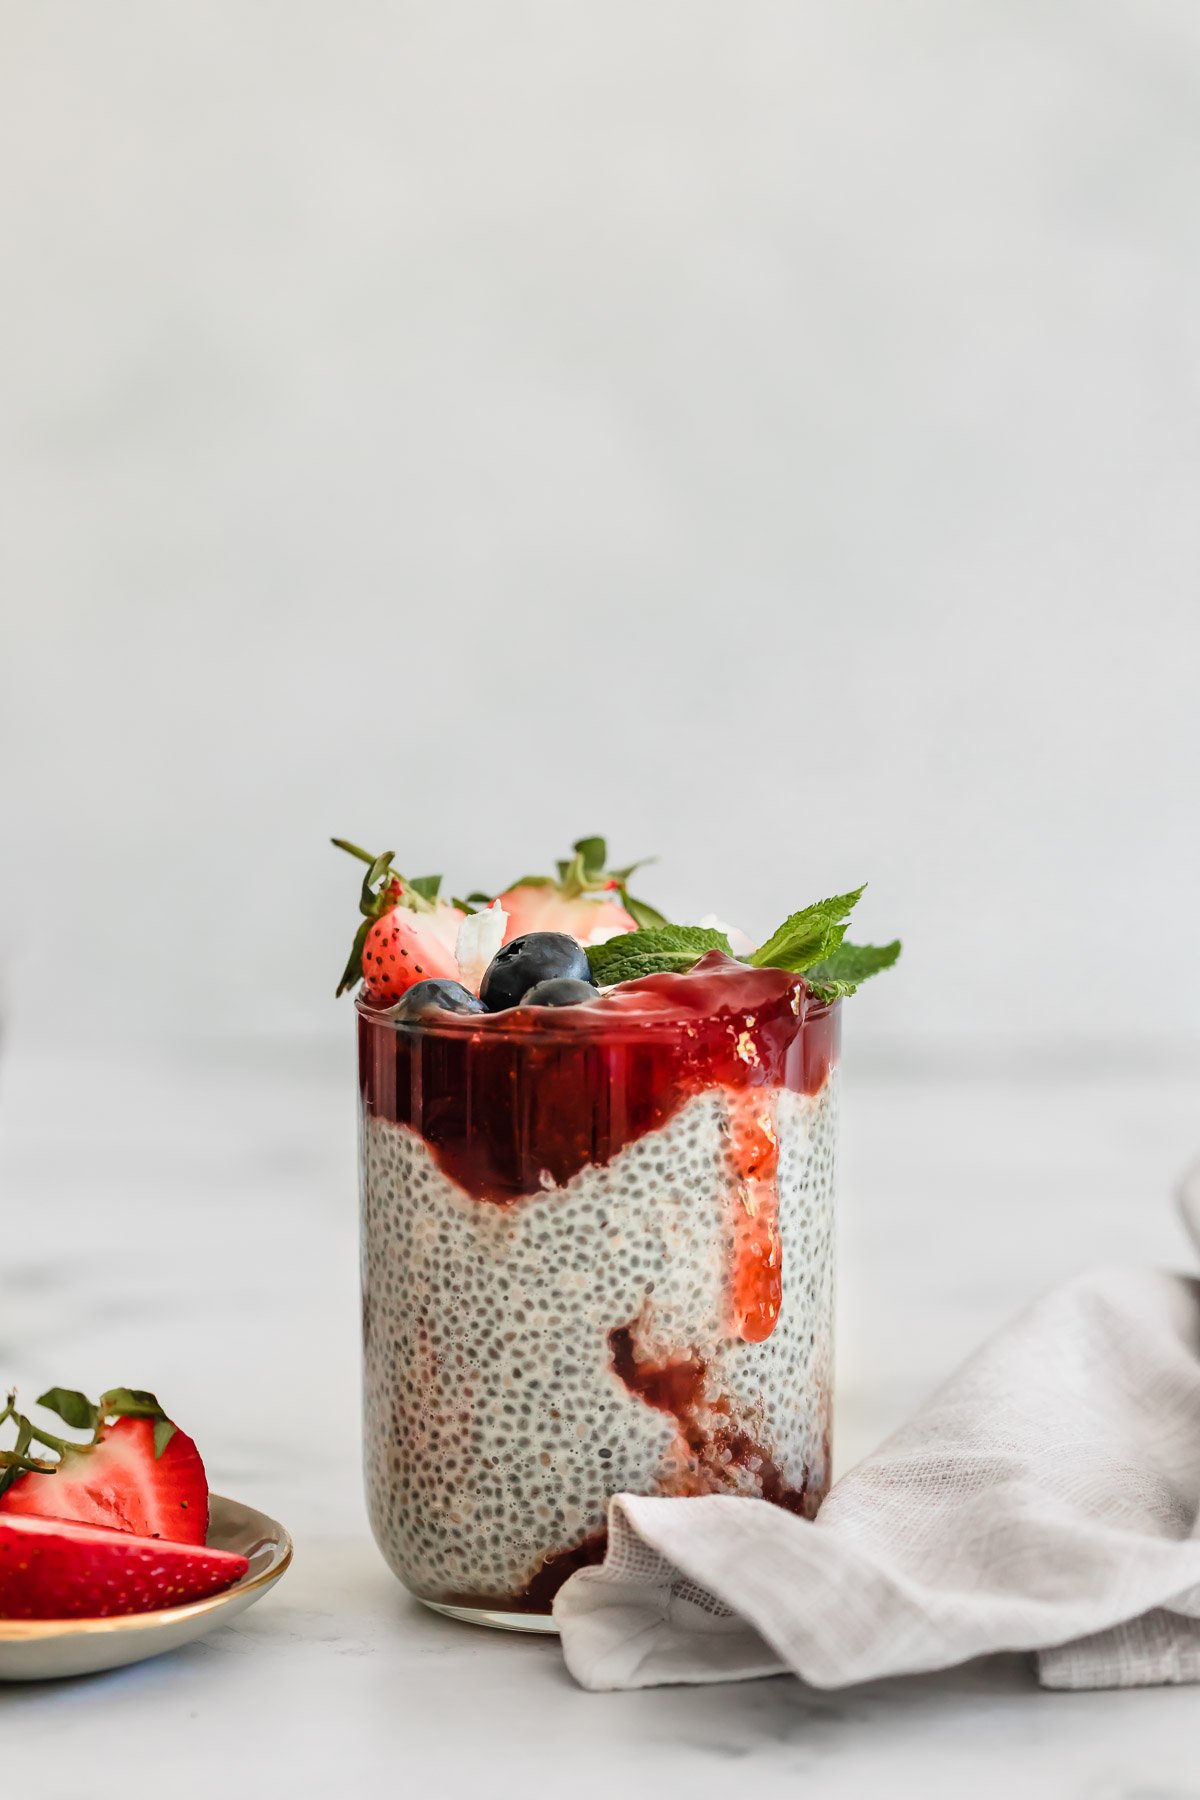 Oat milk chia pudding with berries